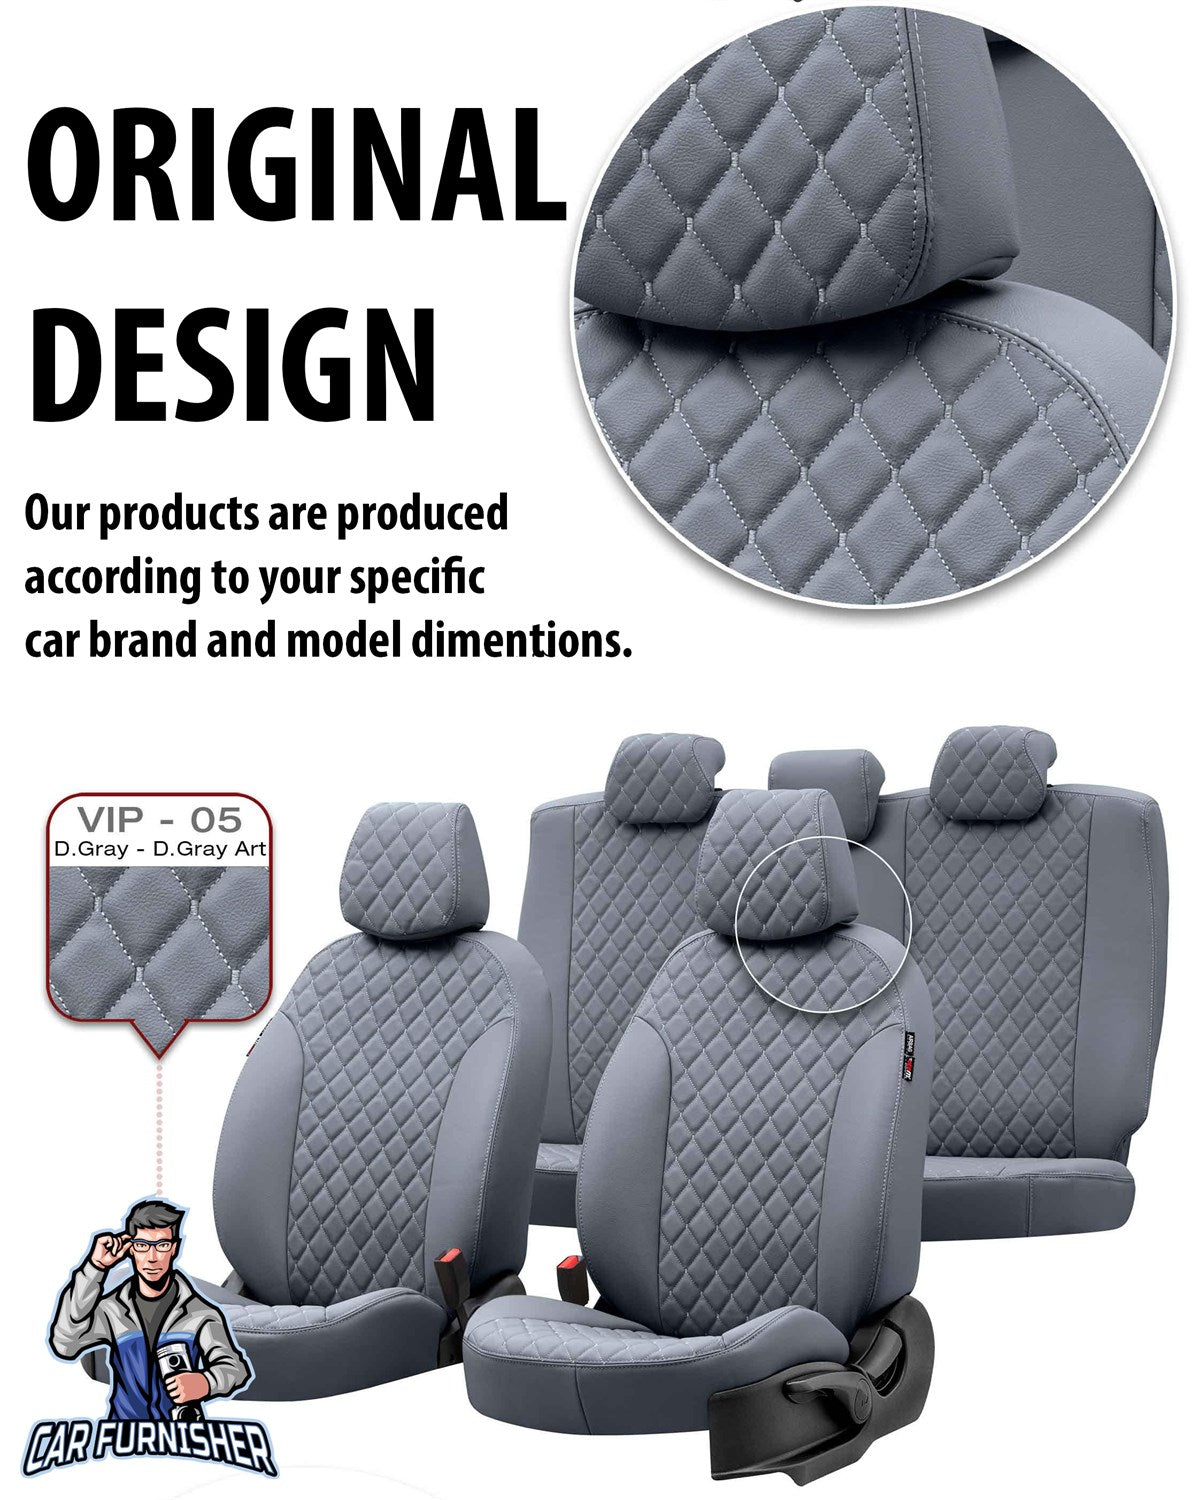 Skoda Roomstar Seat Cover Madrid Leather Design Dark Gray Leather